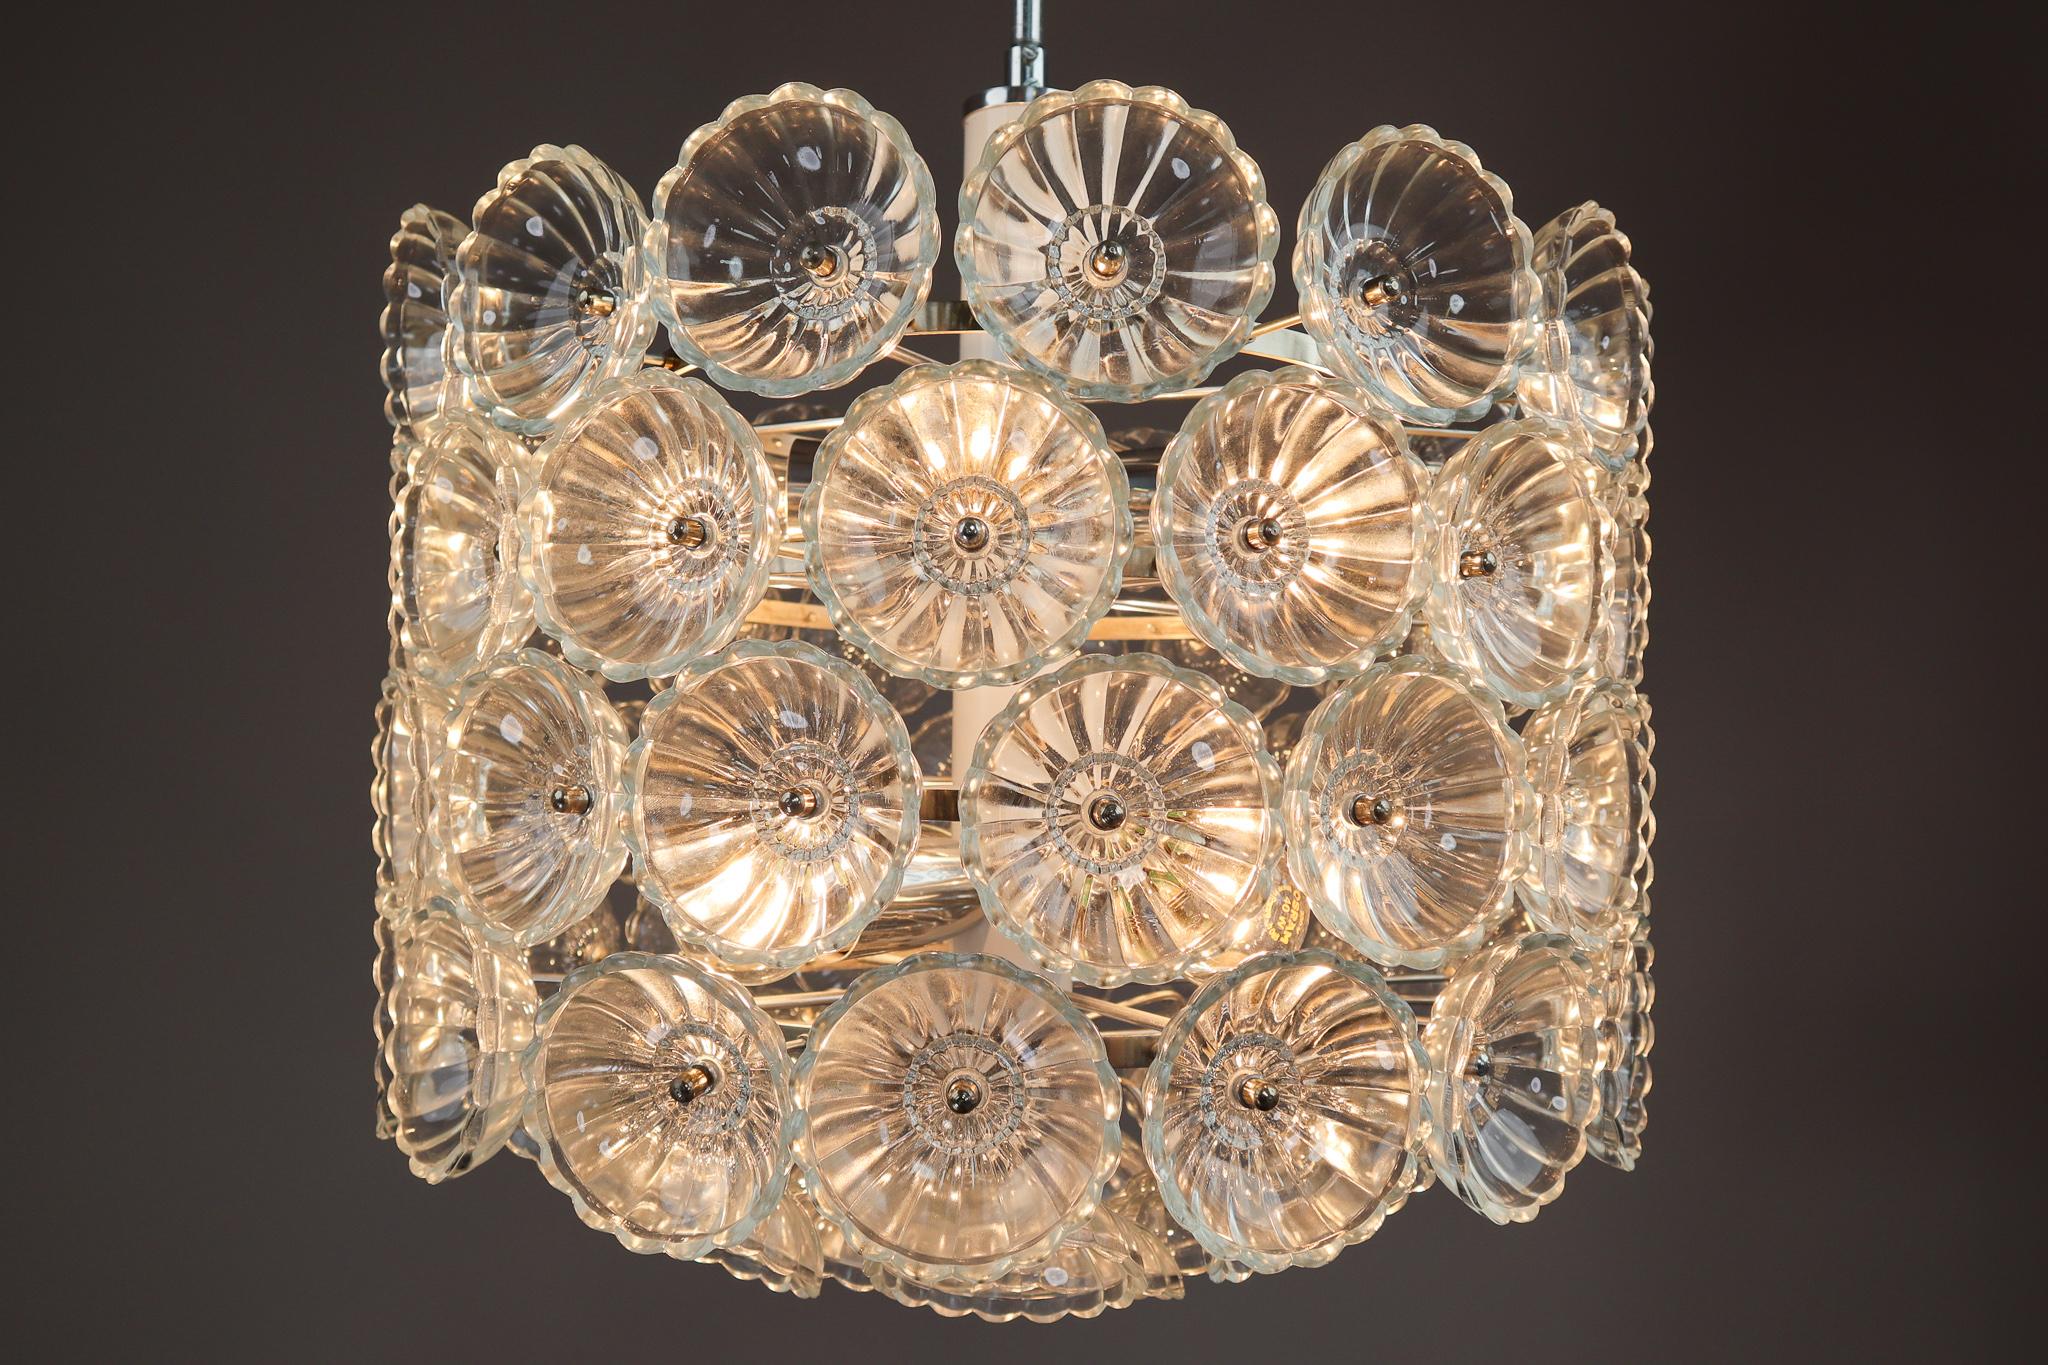 We offer an amazing and rare floral glass and brass light fixture in cylindrical shape in the style of Emil Stejnar, manufactured in the 1960s in Germany. Very heavy with glass flowers on a brass sputnik frame. The glass pieces are beautifully cut